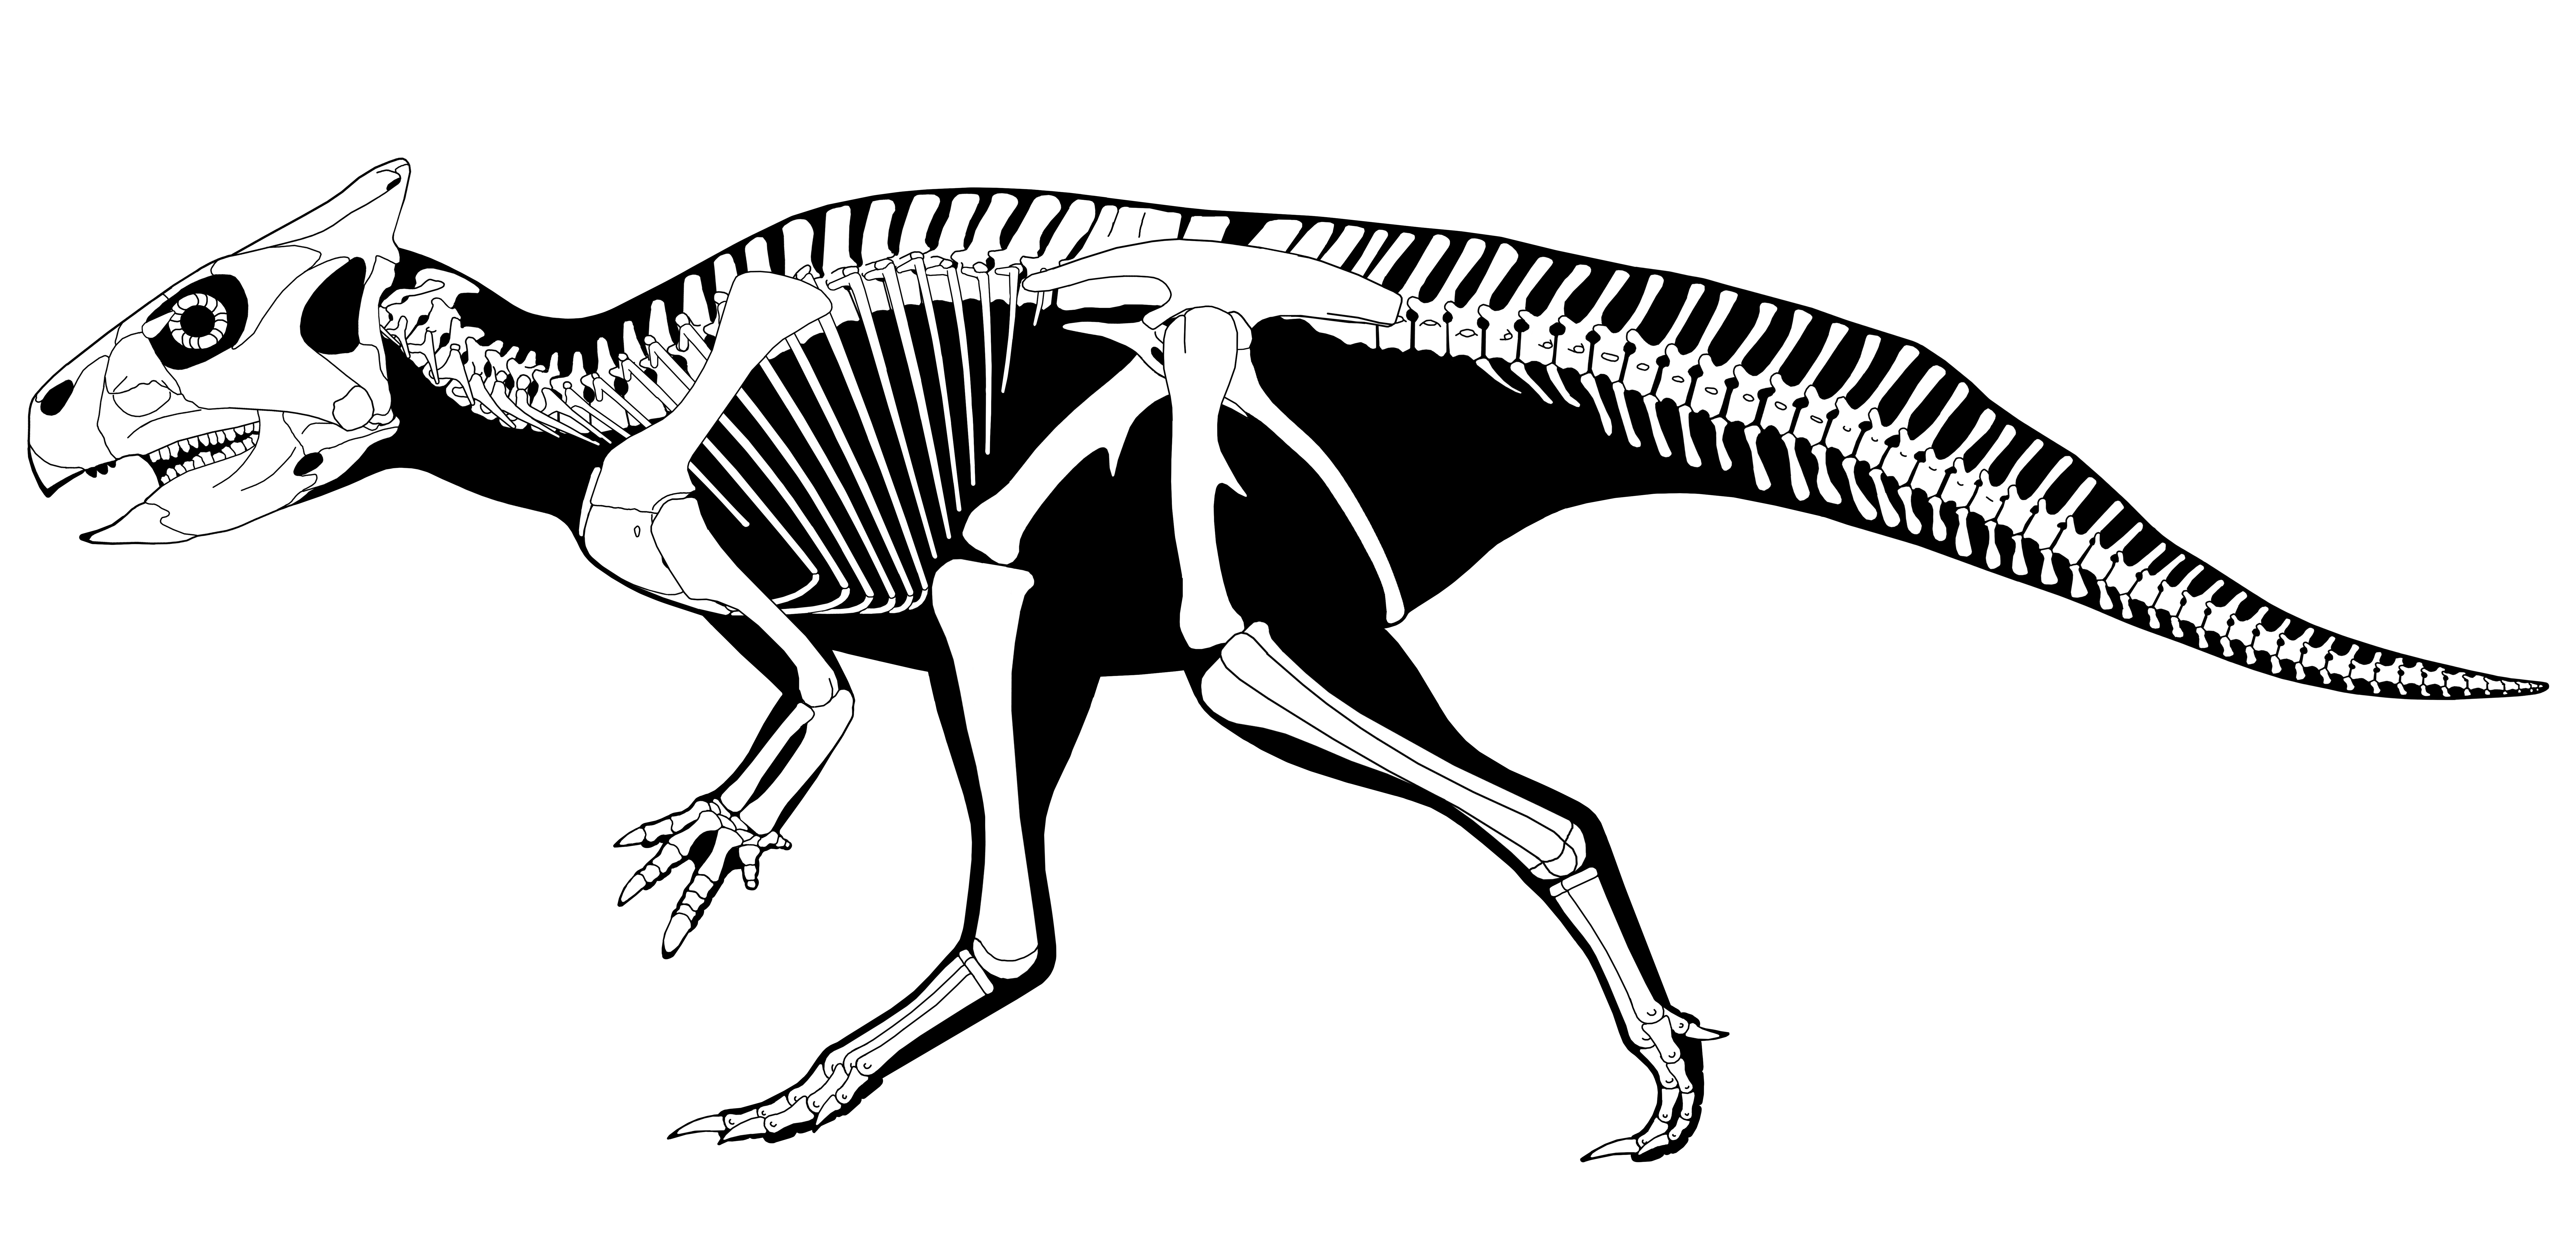 illustration of a dinosaur skeleton representing Auroracertaops, new species characterized by Penn paleontologists